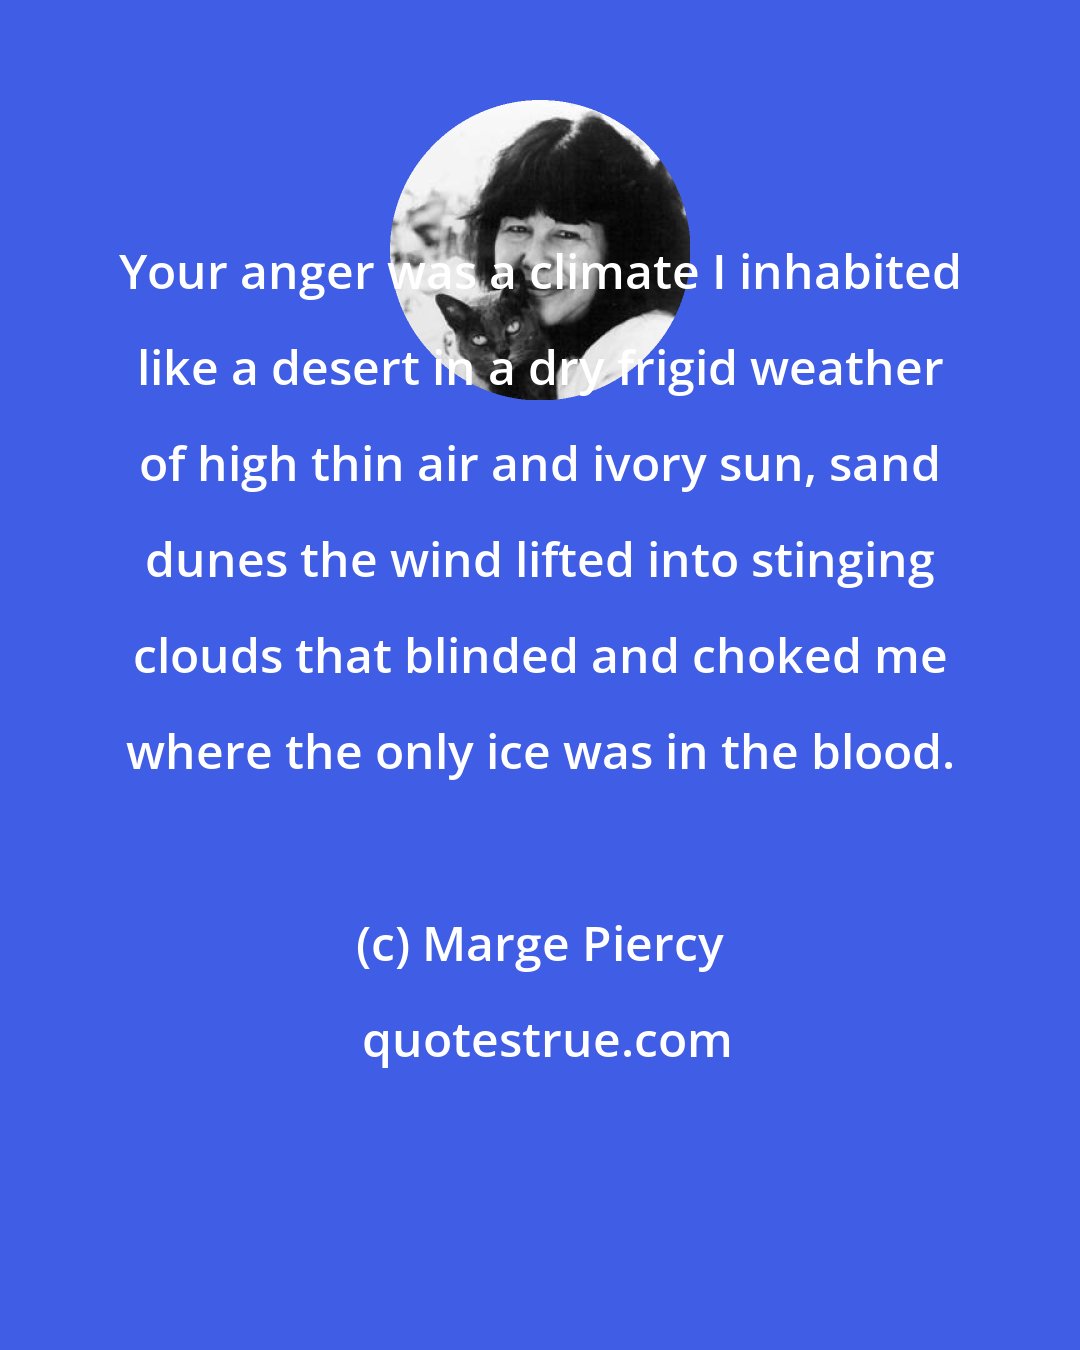 Marge Piercy: Your anger was a climate I inhabited like a desert in a dry frigid weather of high thin air and ivory sun, sand dunes the wind lifted into stinging clouds that blinded and choked me where the only ice was in the blood.